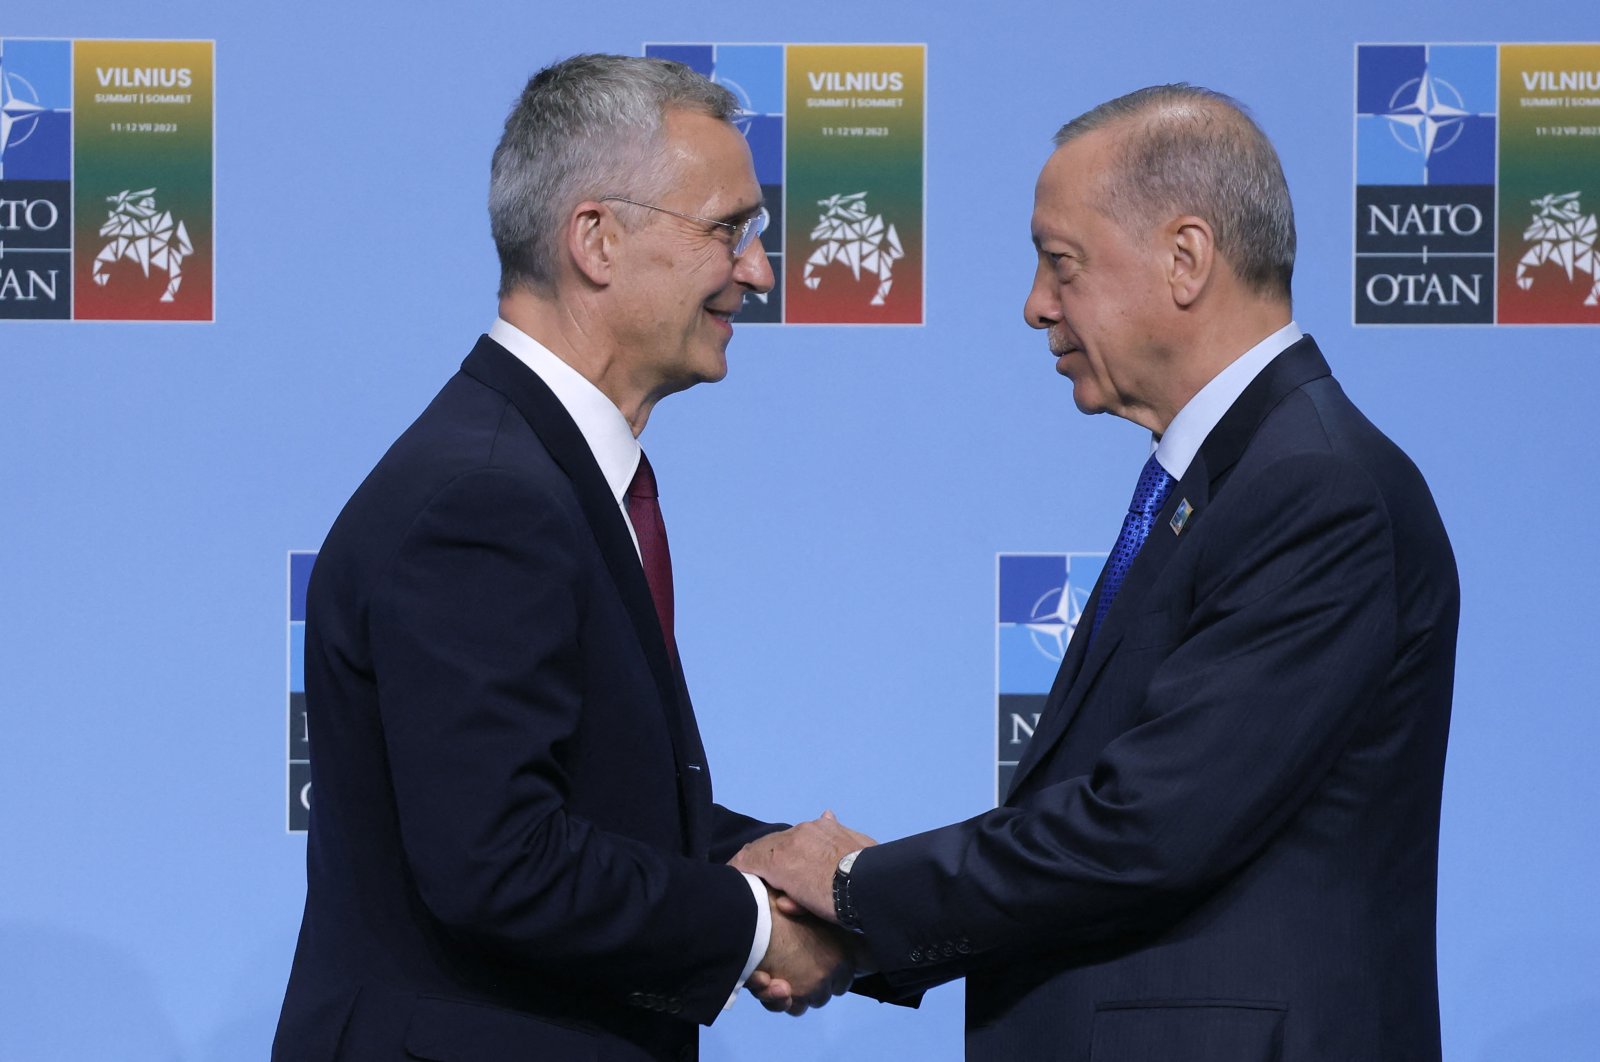 NATO Secretary-General Jens Stoltenberg (L) shakes hands with President Recep Tayyip Erdoğan as he arrives for the NATO summit in Vilnius, Lithuania, July 11, 2023. (AFP Photo)